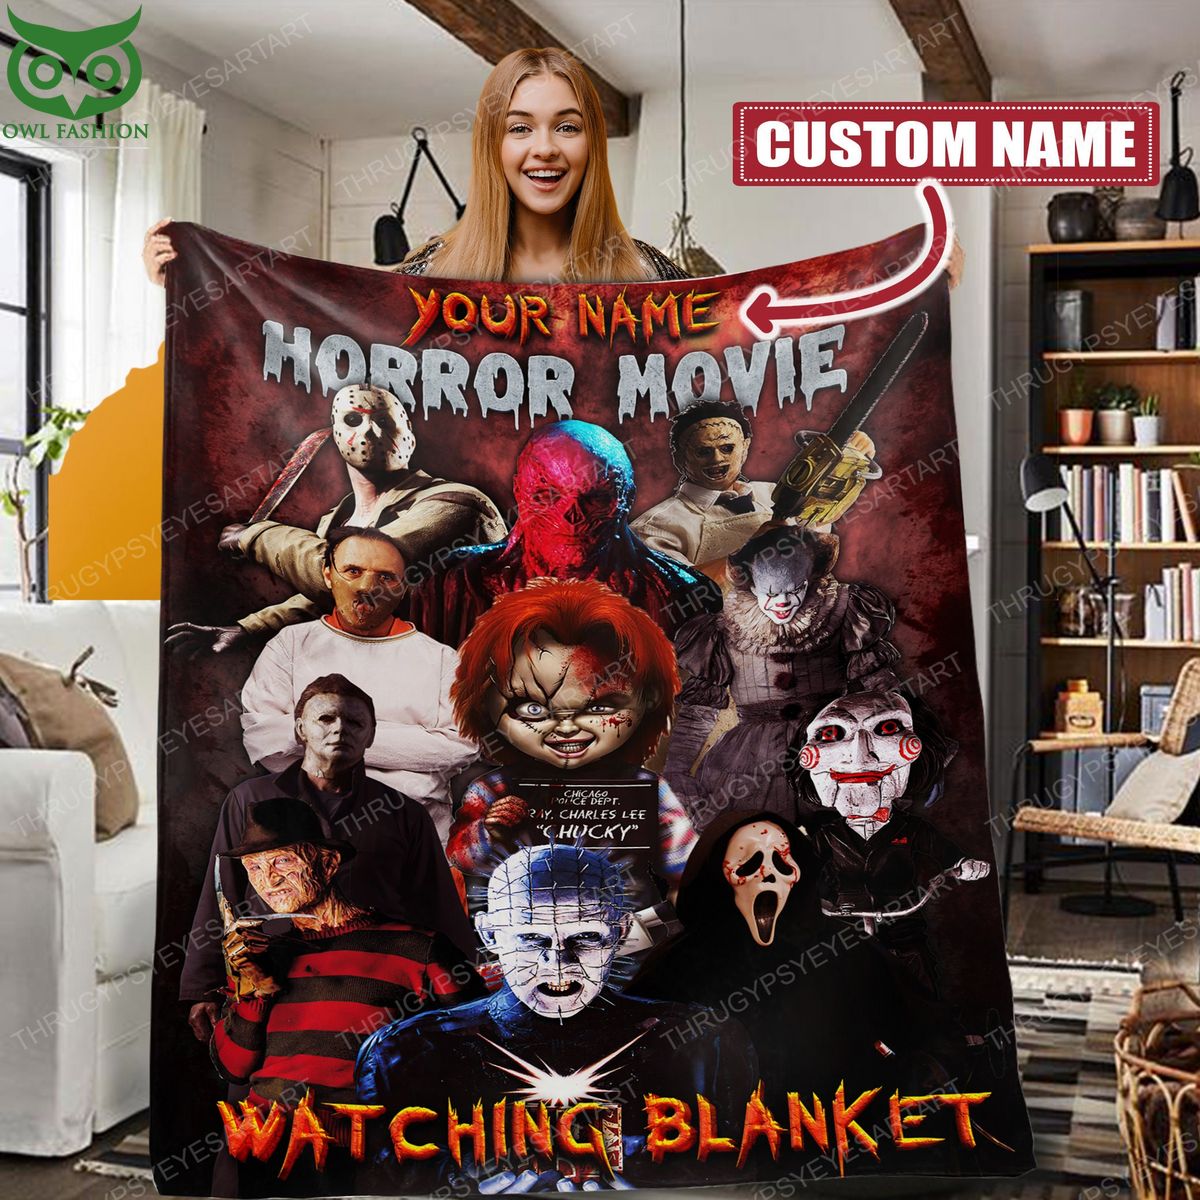 Personalized This Is My Horror Movie Watching Halloween Blanket